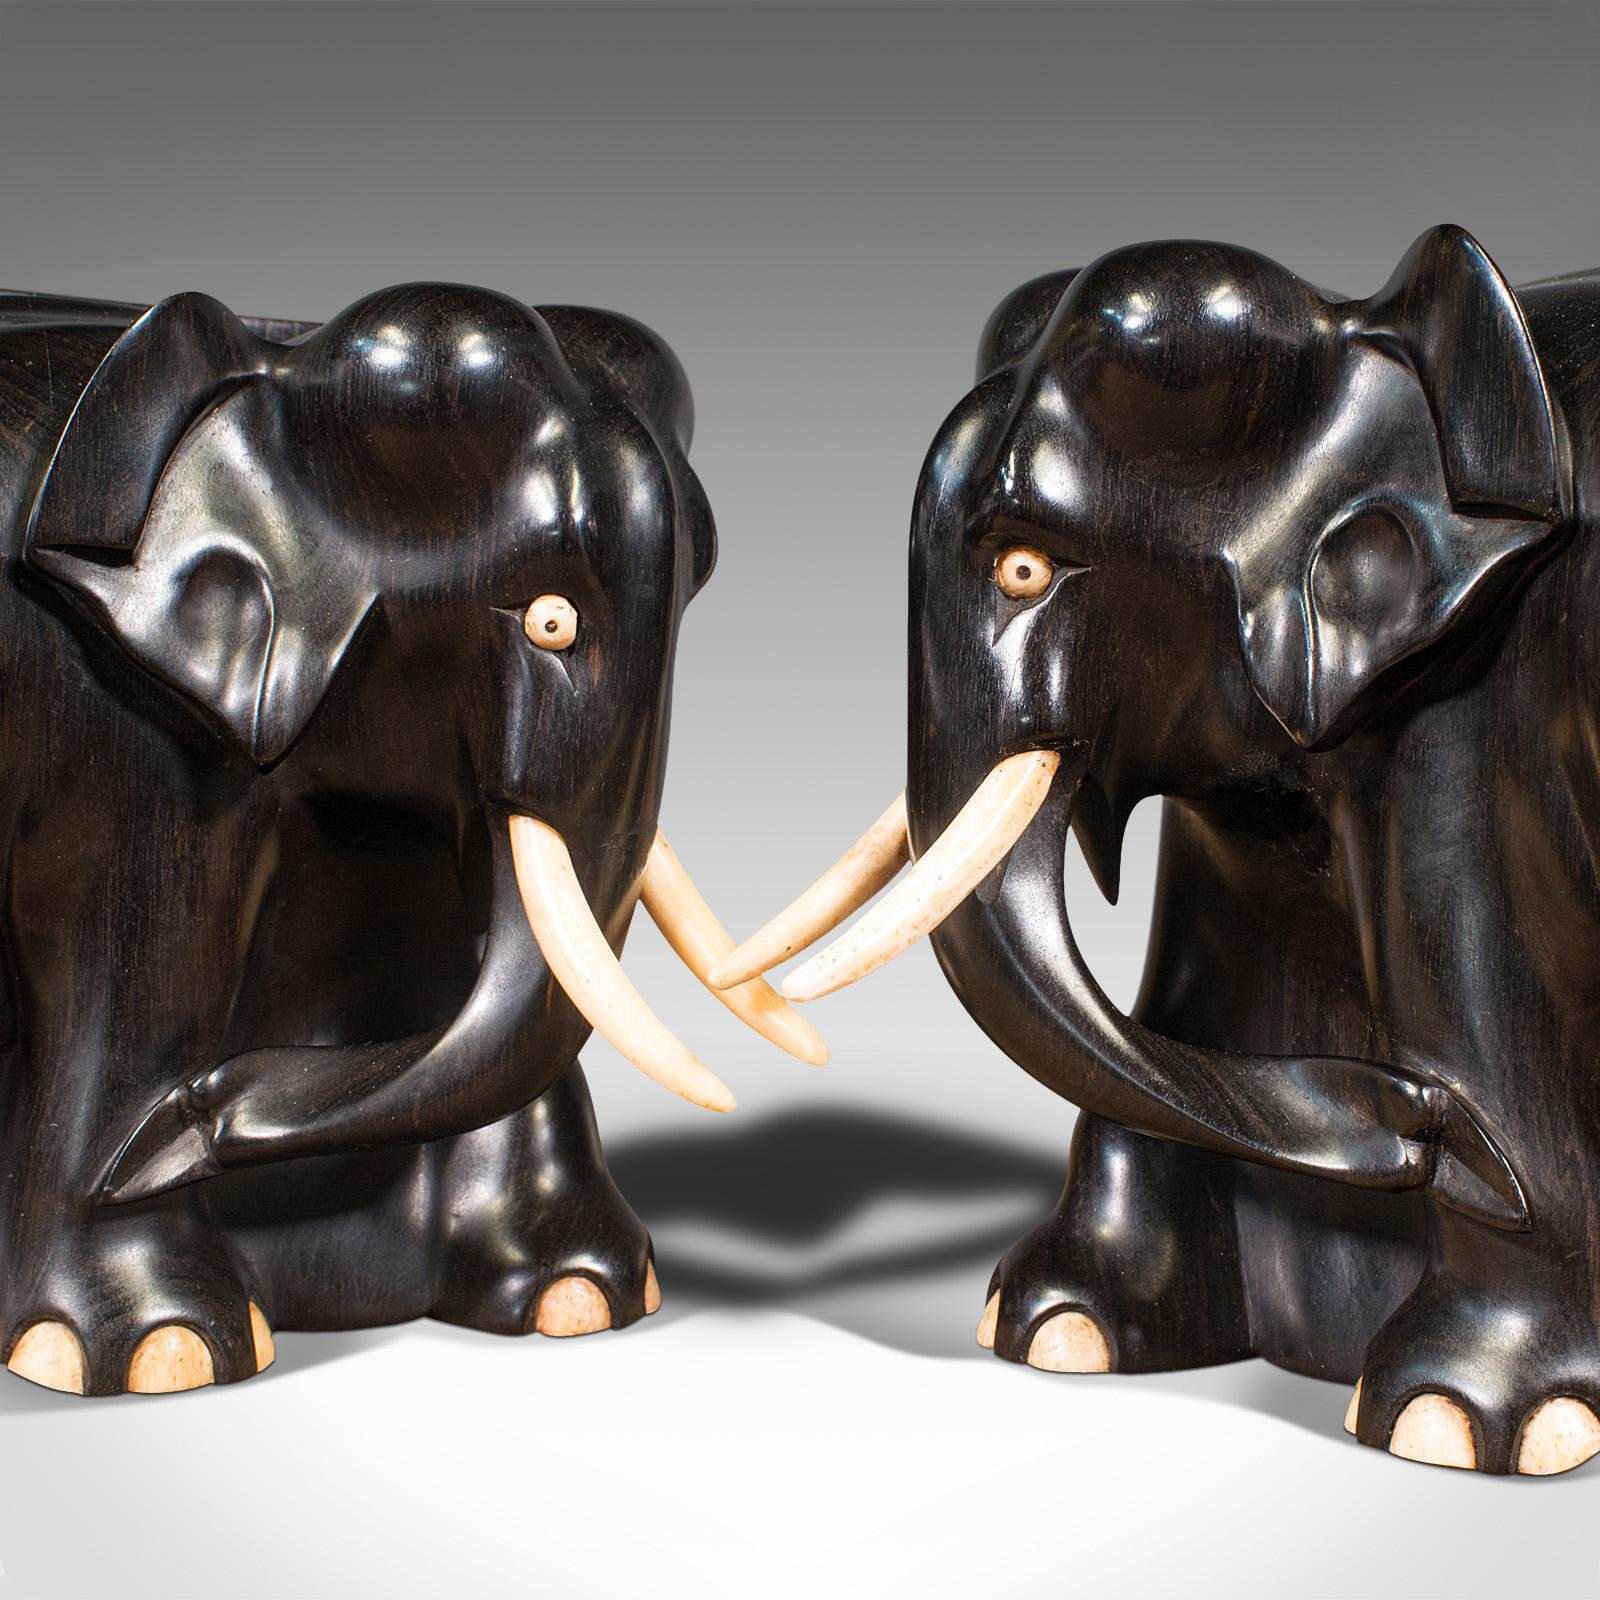 Pair of Antique Elephant Bookends, English, Ebony, Carved, Book Rest, Victorian For Sale 3